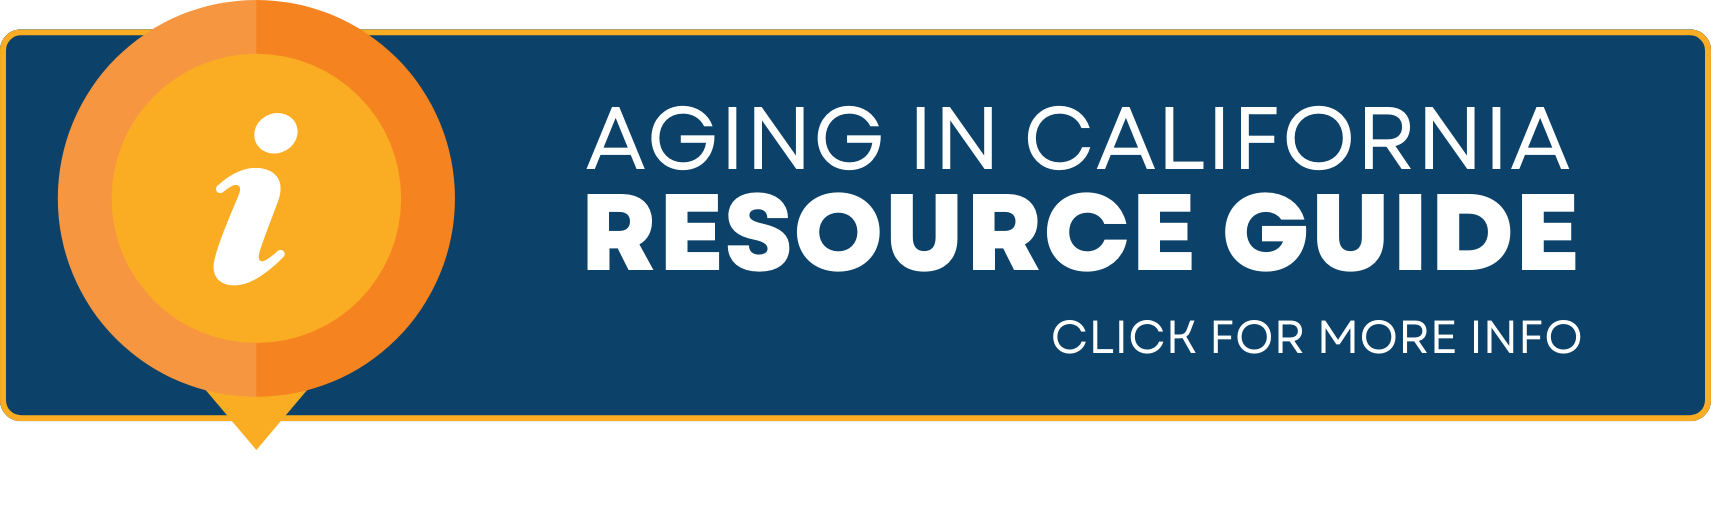 banner image with link for aging in california resource guide